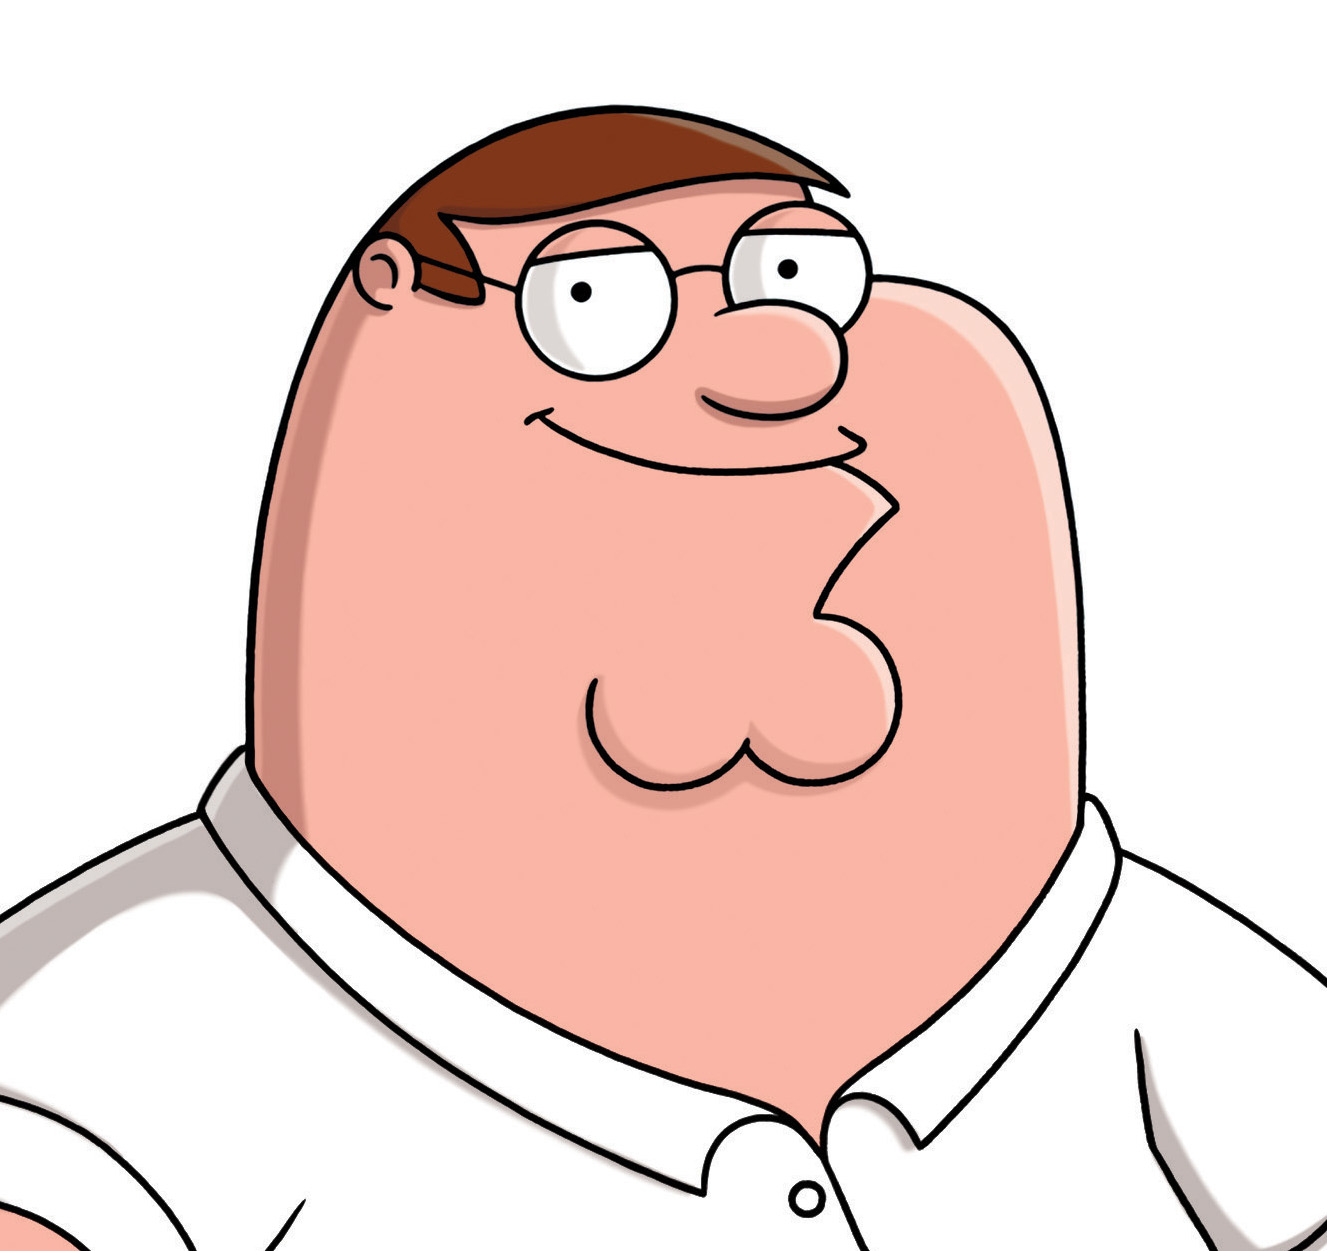 peter-griffin-family-guy-cleft-chin-photo.jpg